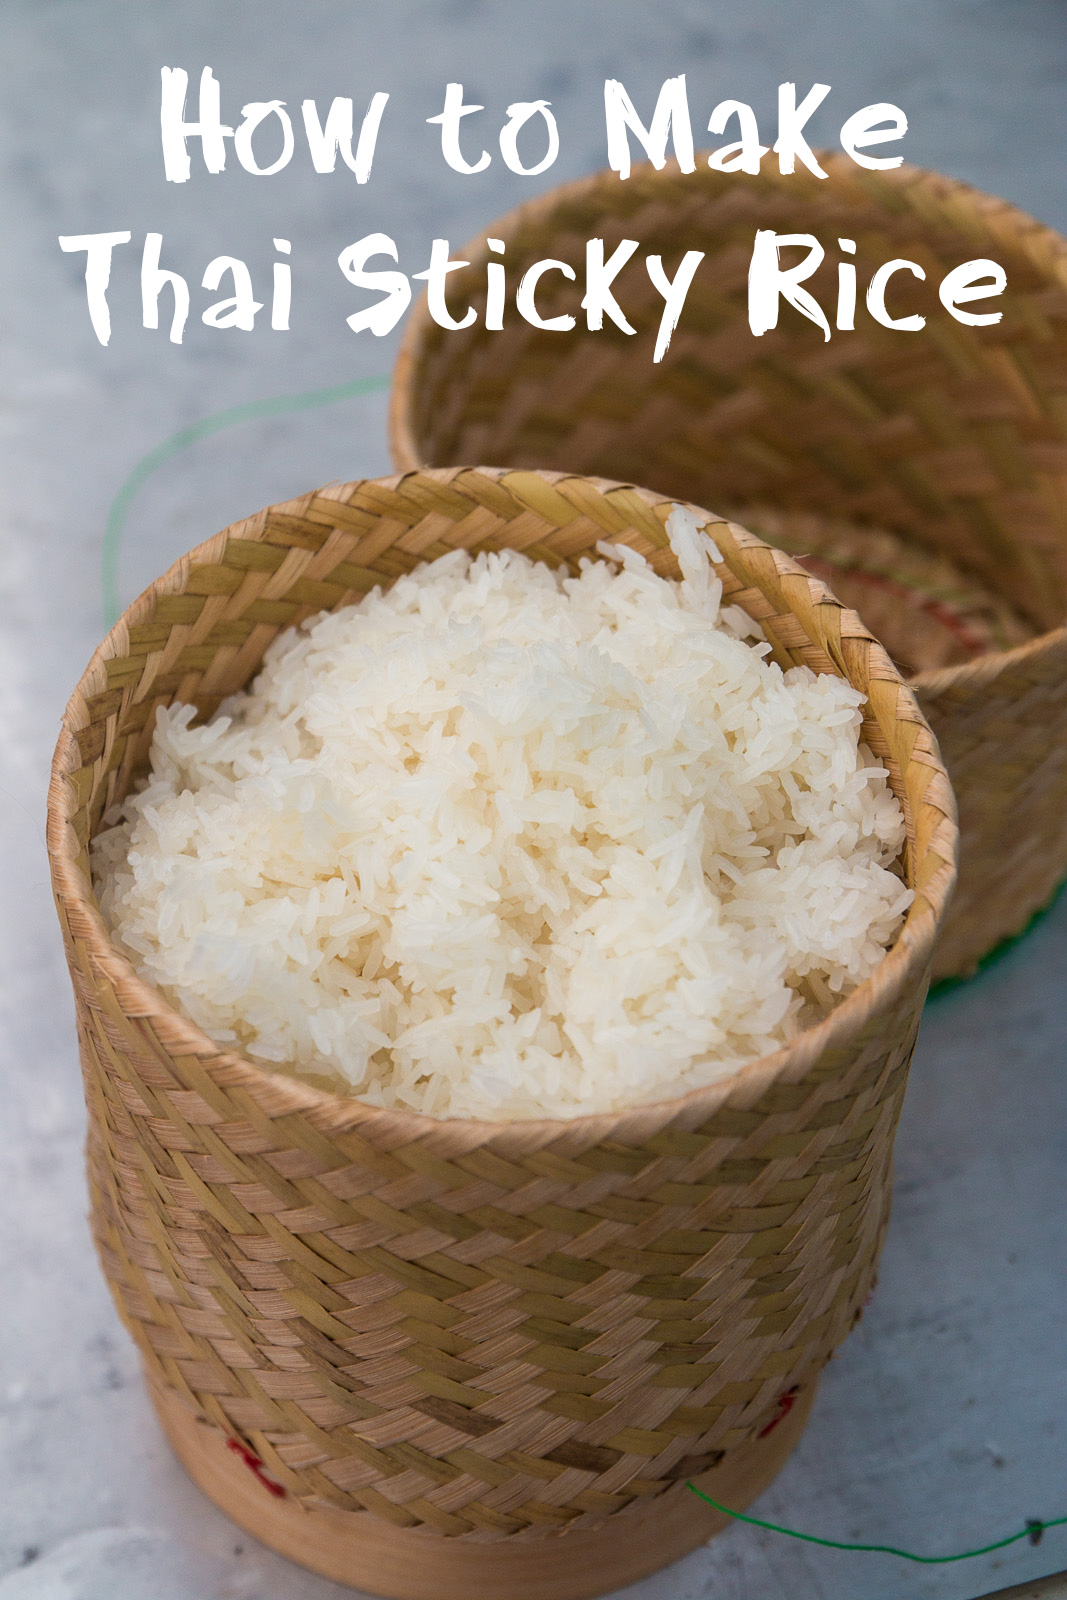 How to Make Thai Sticky Rice (So It's Fluffy and Moist)